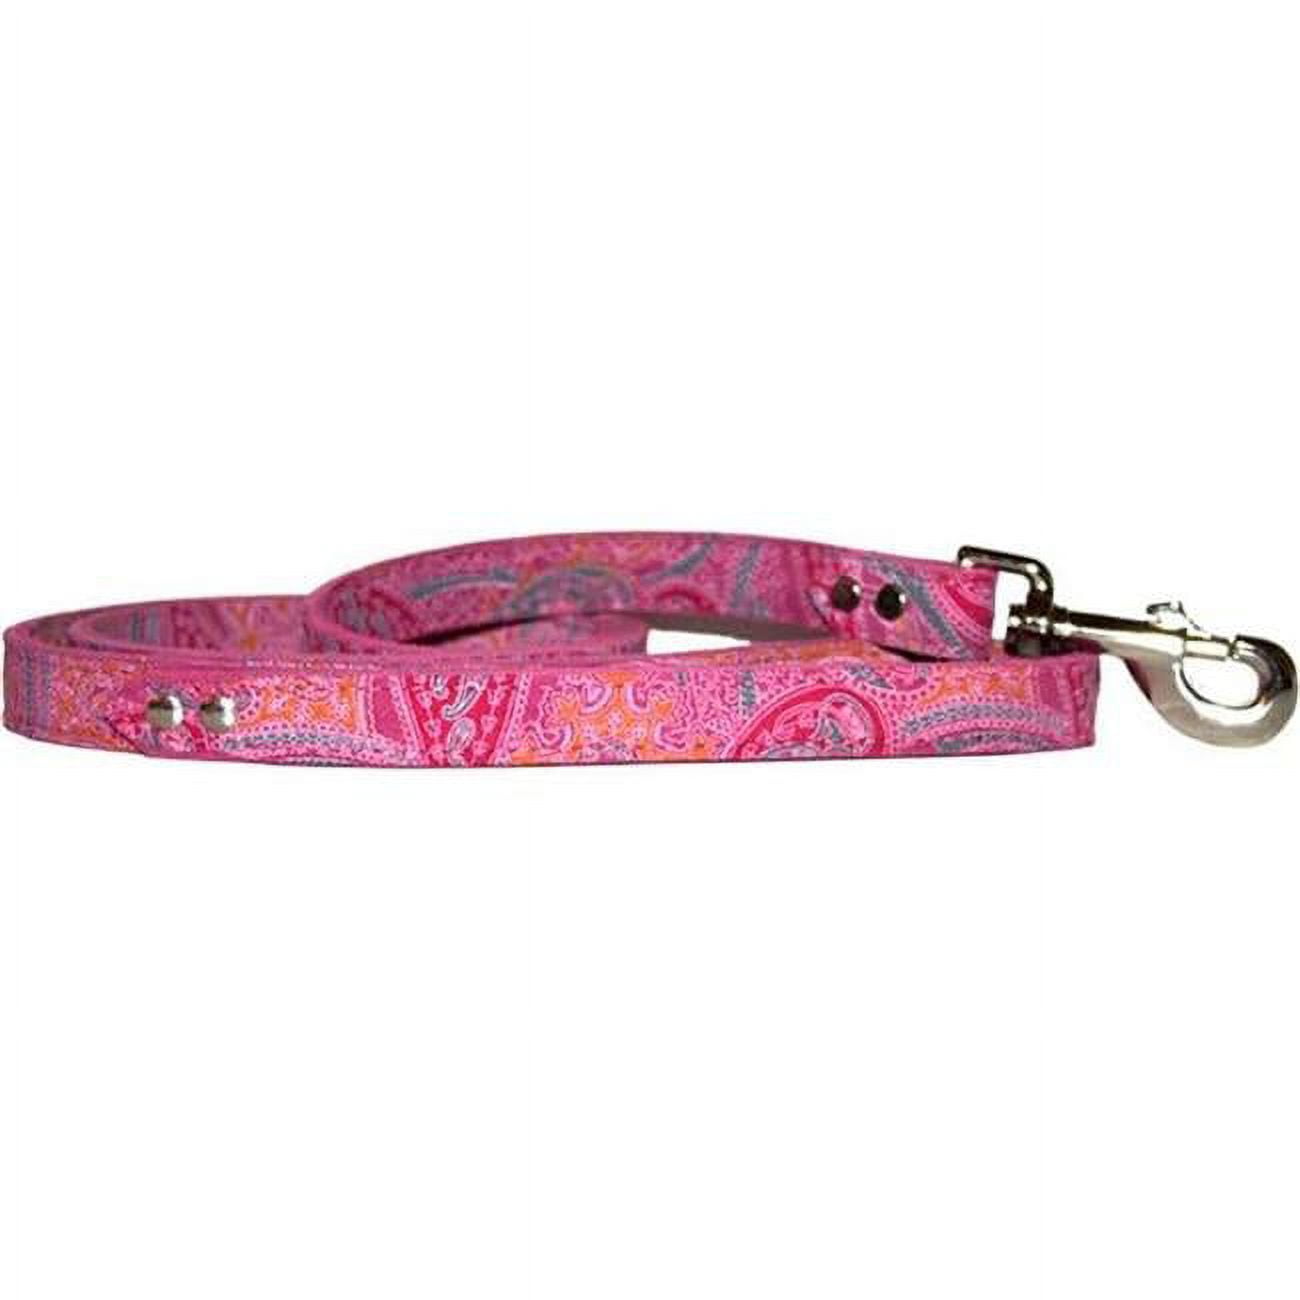 Picture of Leather Brothers 6254-PK 0.5 x 4 ft. Paisley Dog Leash, Pink